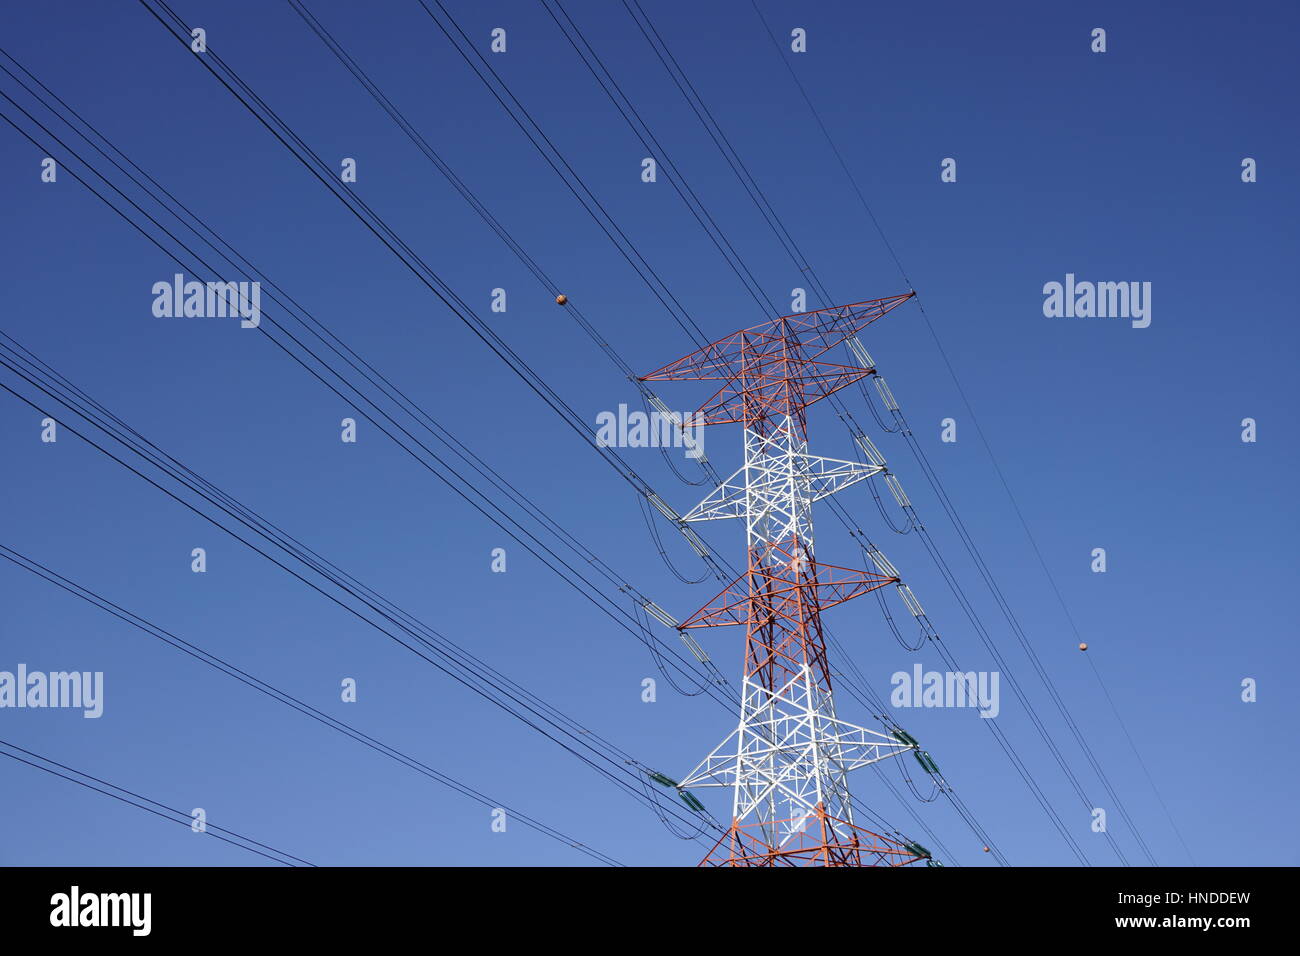 electricity transmission tower with blue skies Stock Photo